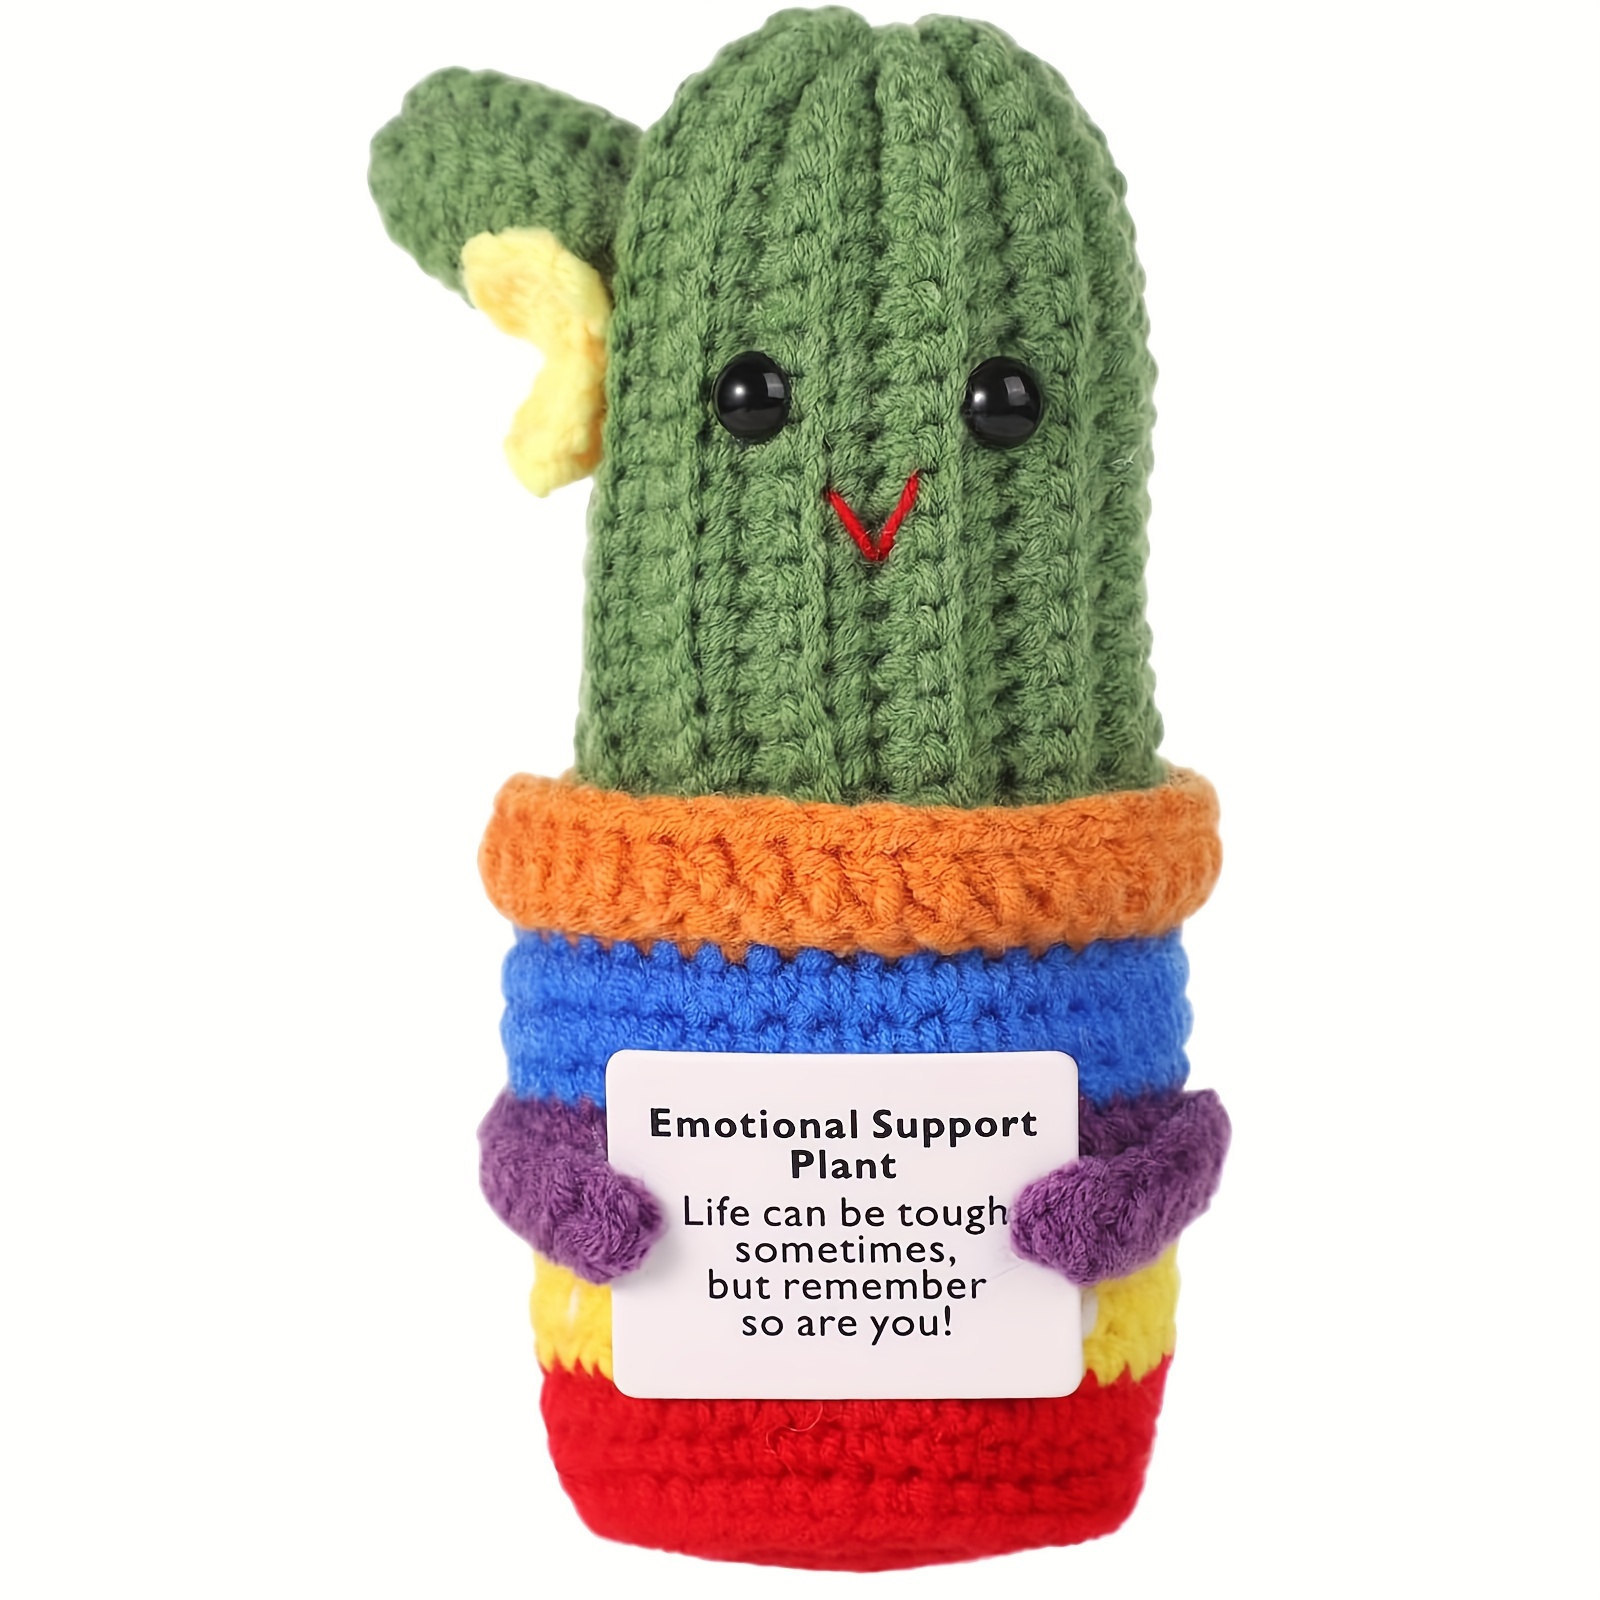 

quirky Gift" 5.1" Whimsical Crochet Cactus With Encouragement Card - Wool Knitted Plant Doll, Perfect For Parties, Birthdays & Cinco De Mayo Celebrations